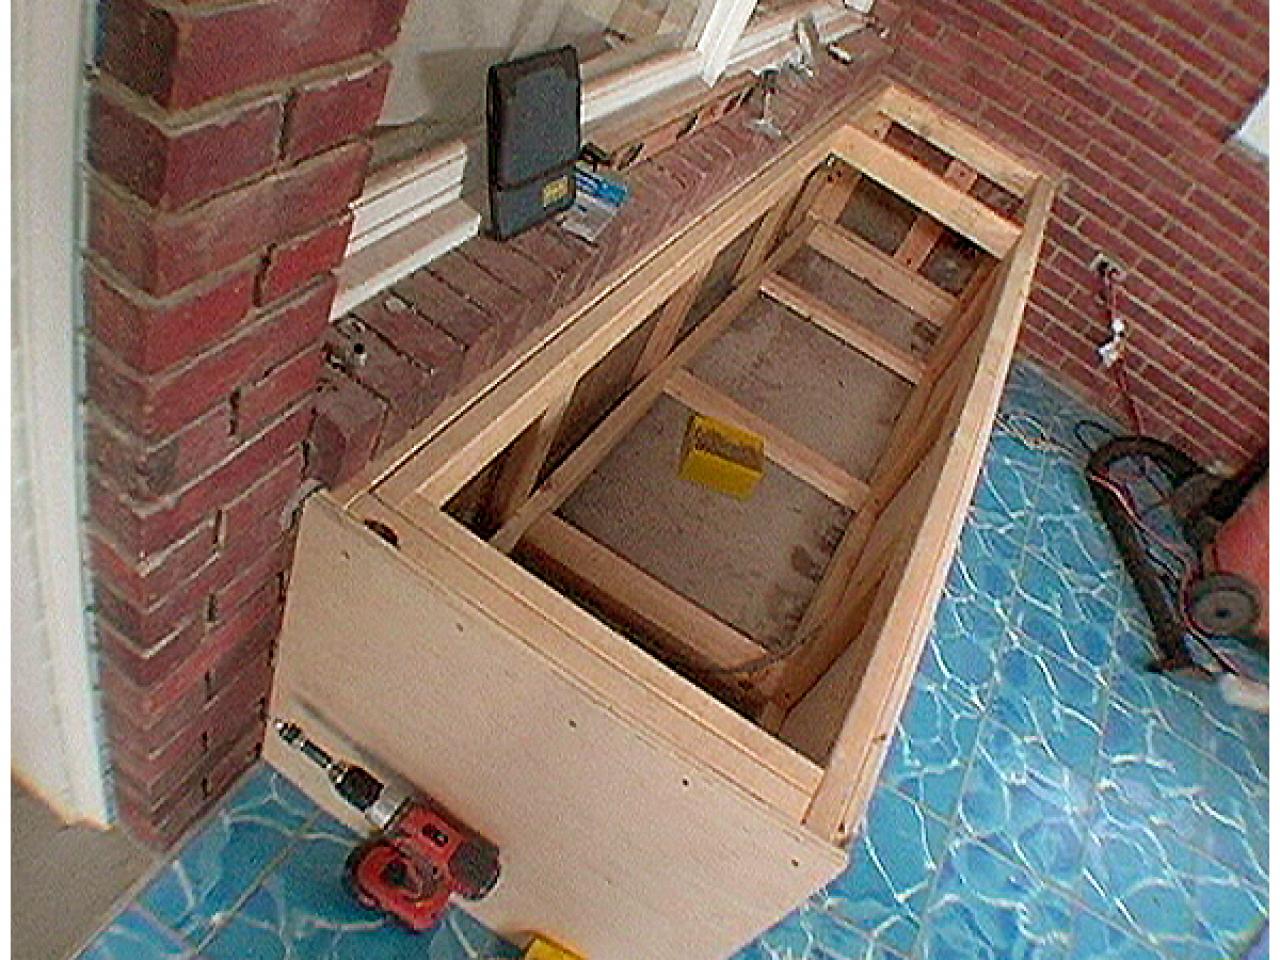 How To Build A Storage Bench Tos, Outdoor Wood Storage Bench Plans Free